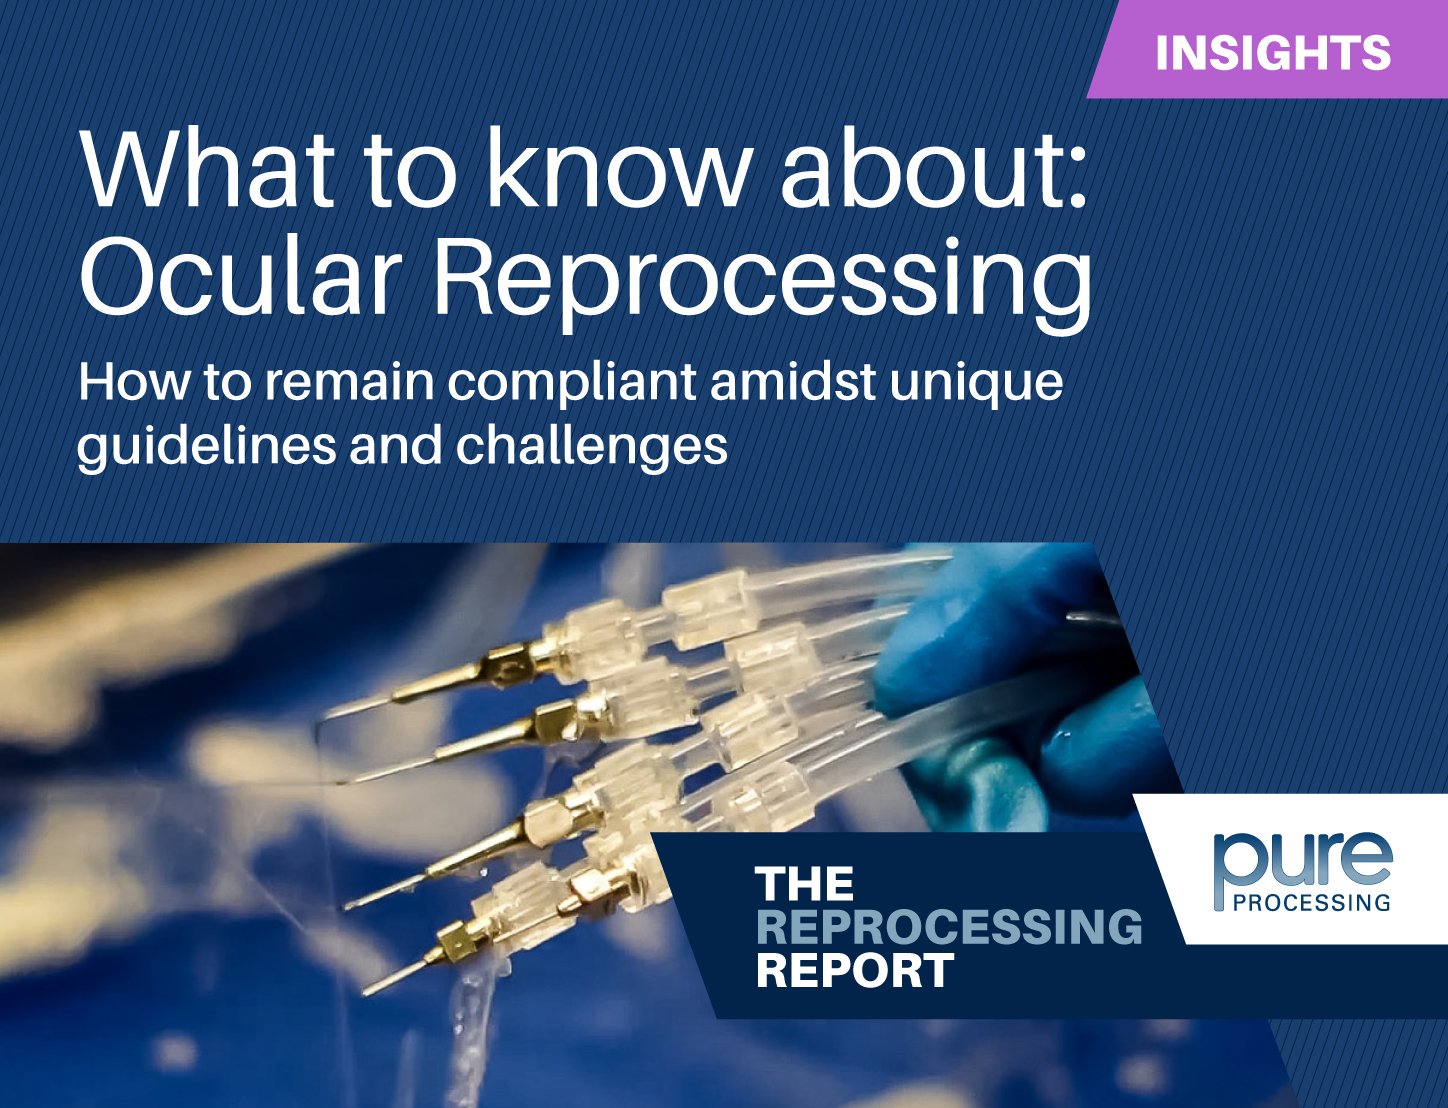 What to know about - Ocular Reprocessing